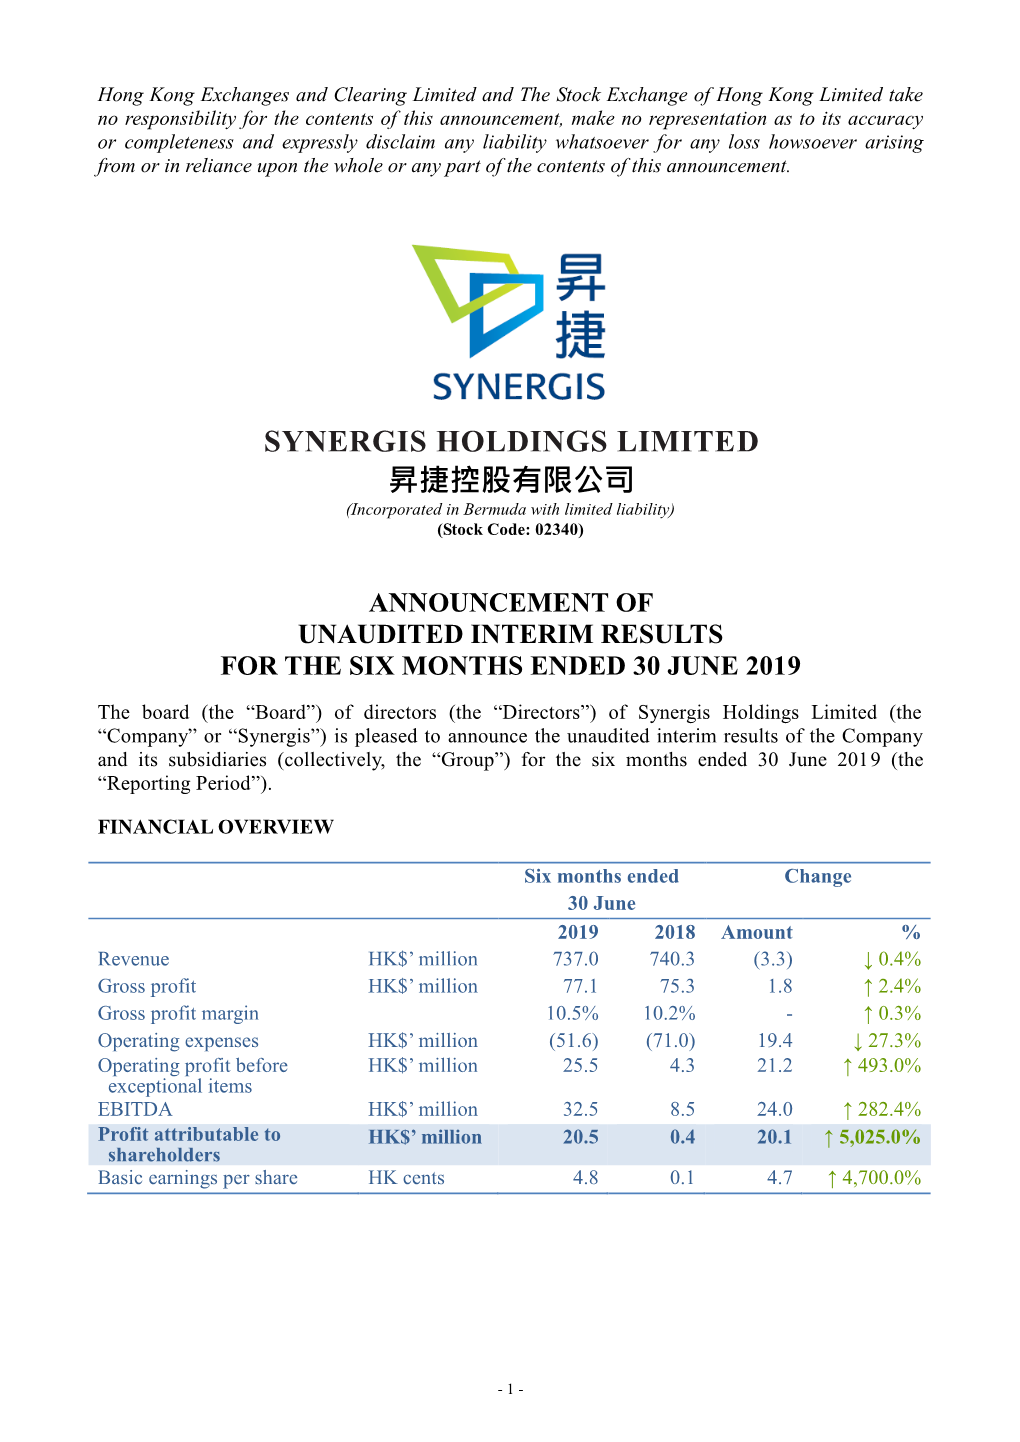 SYNERGIS HOLDINGS LIMITED 昇捷控股有限公司 (Incorporated in Bermuda with Limited Liability) (Stock Code: 02340)